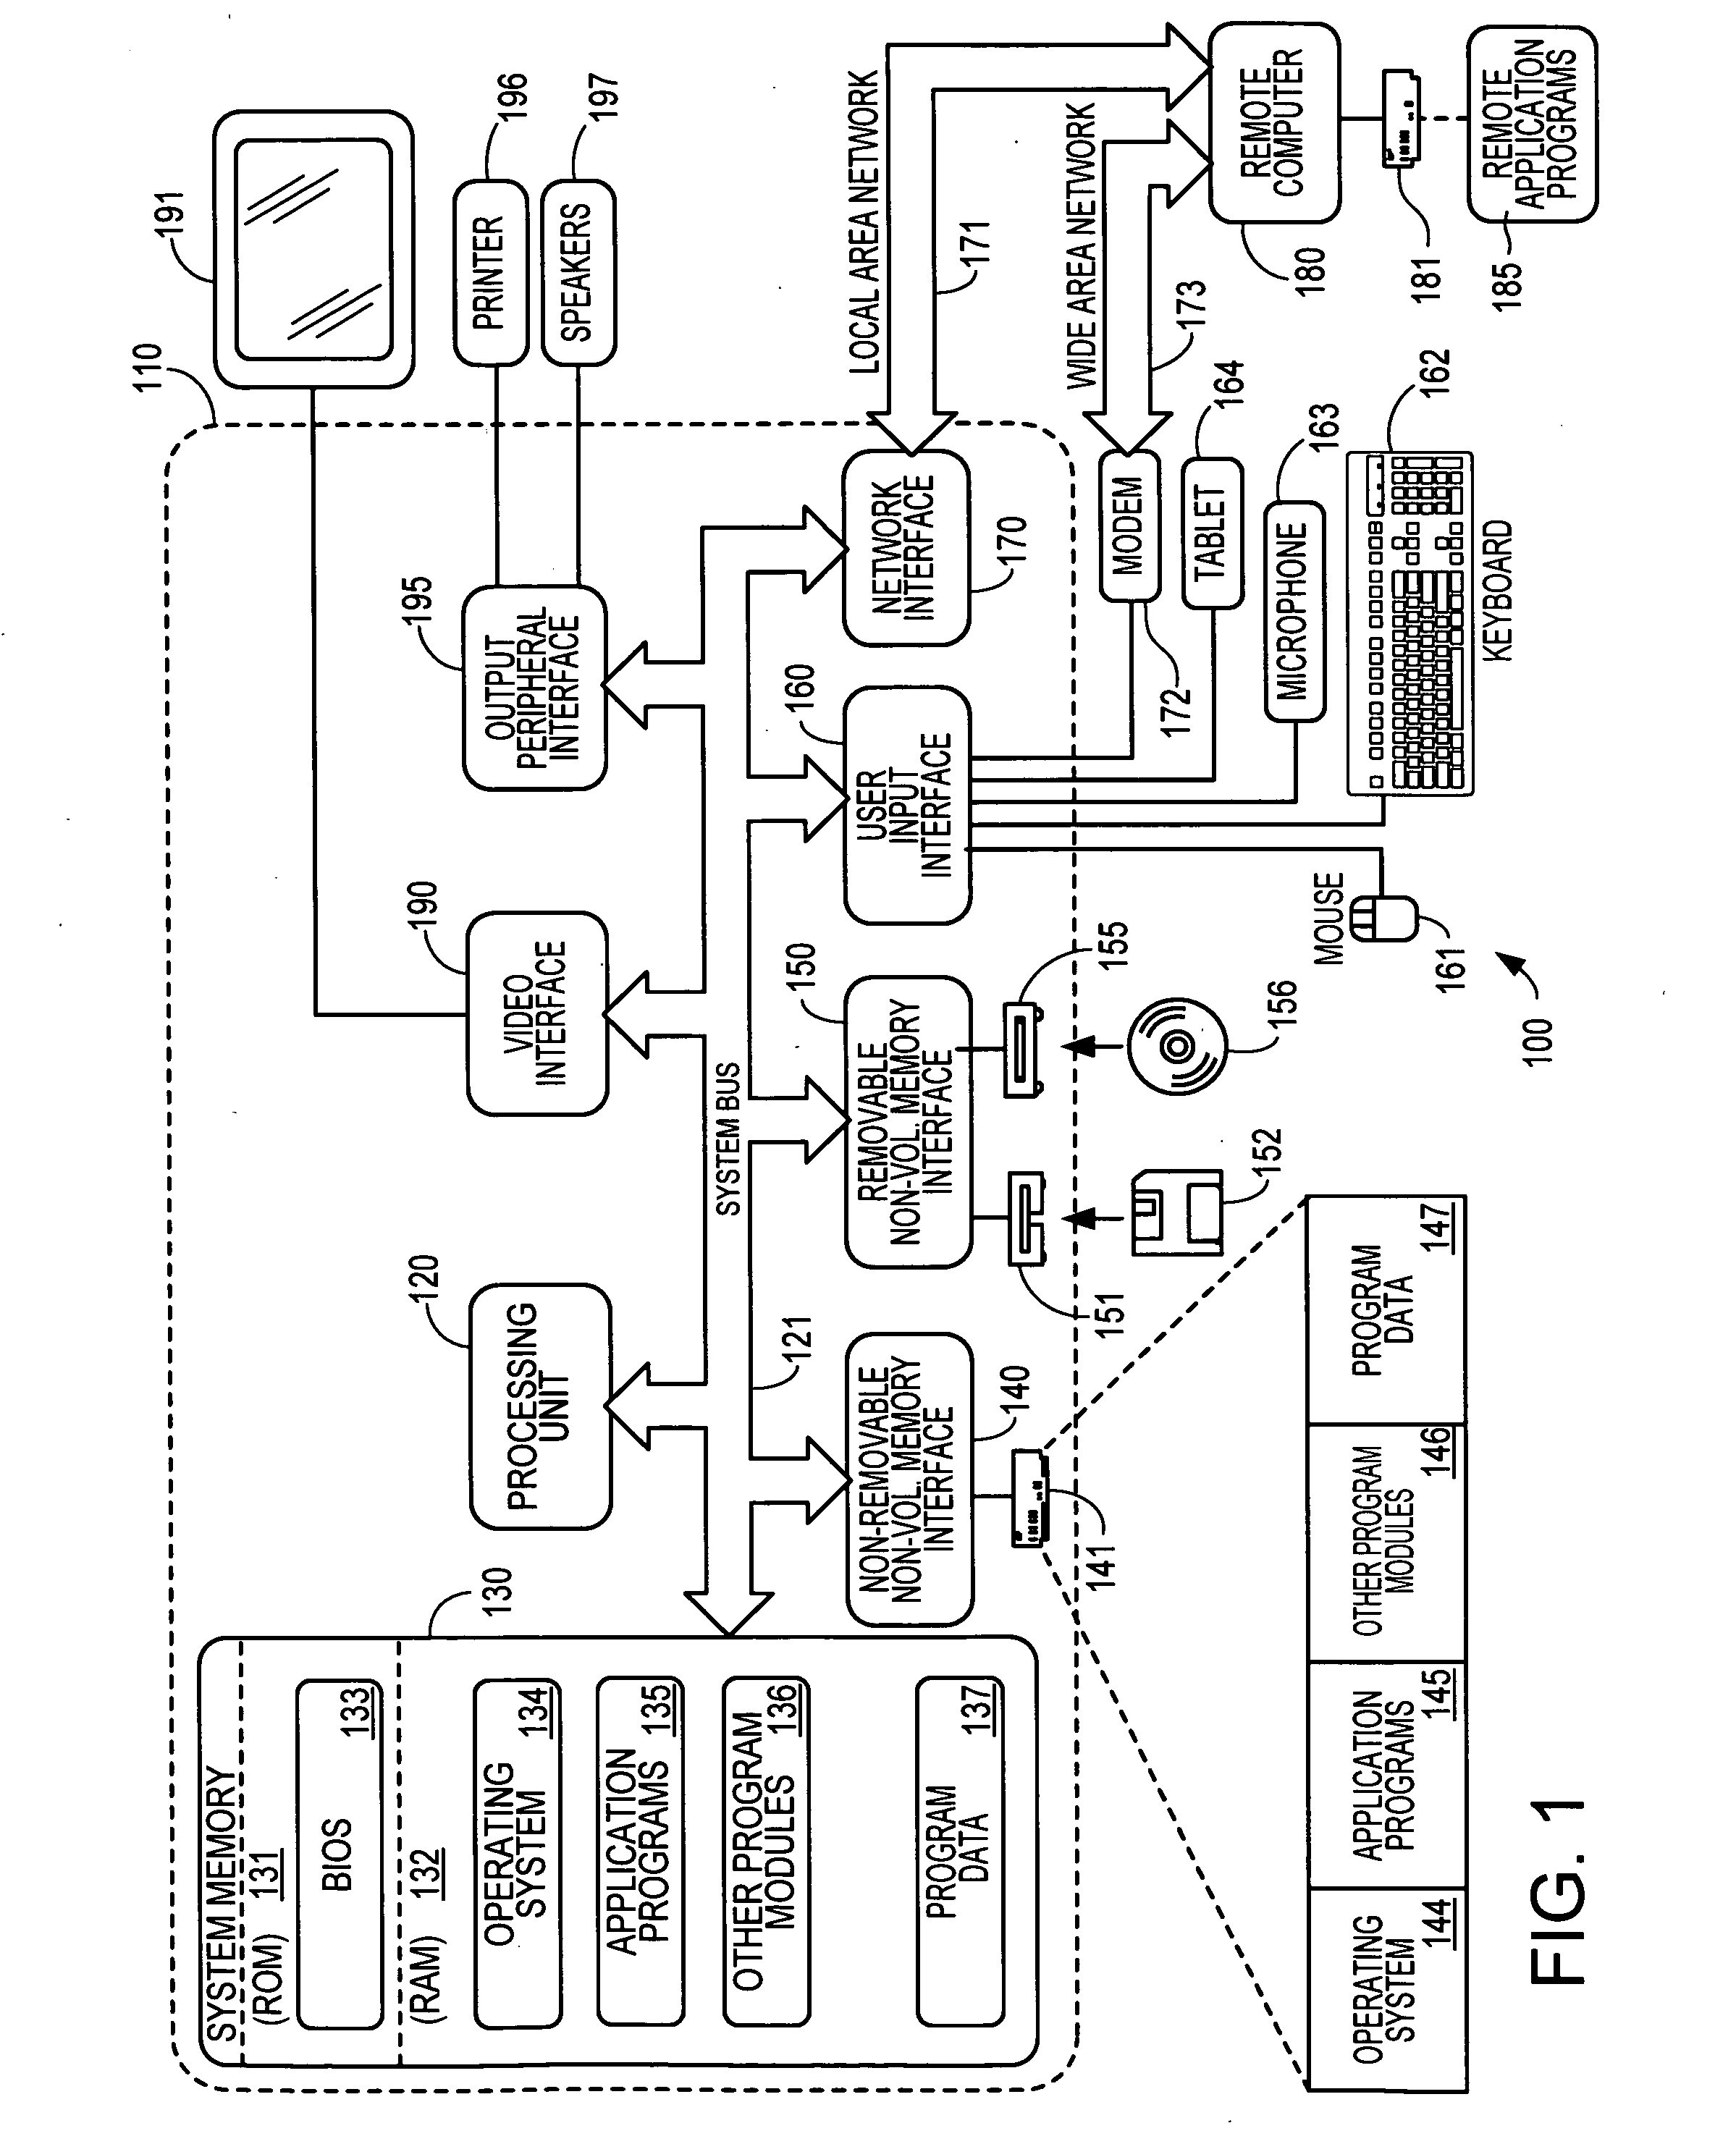 Method and apparatus for secure internet protocol (IPSEC) offloading with integrated host protocol stack management